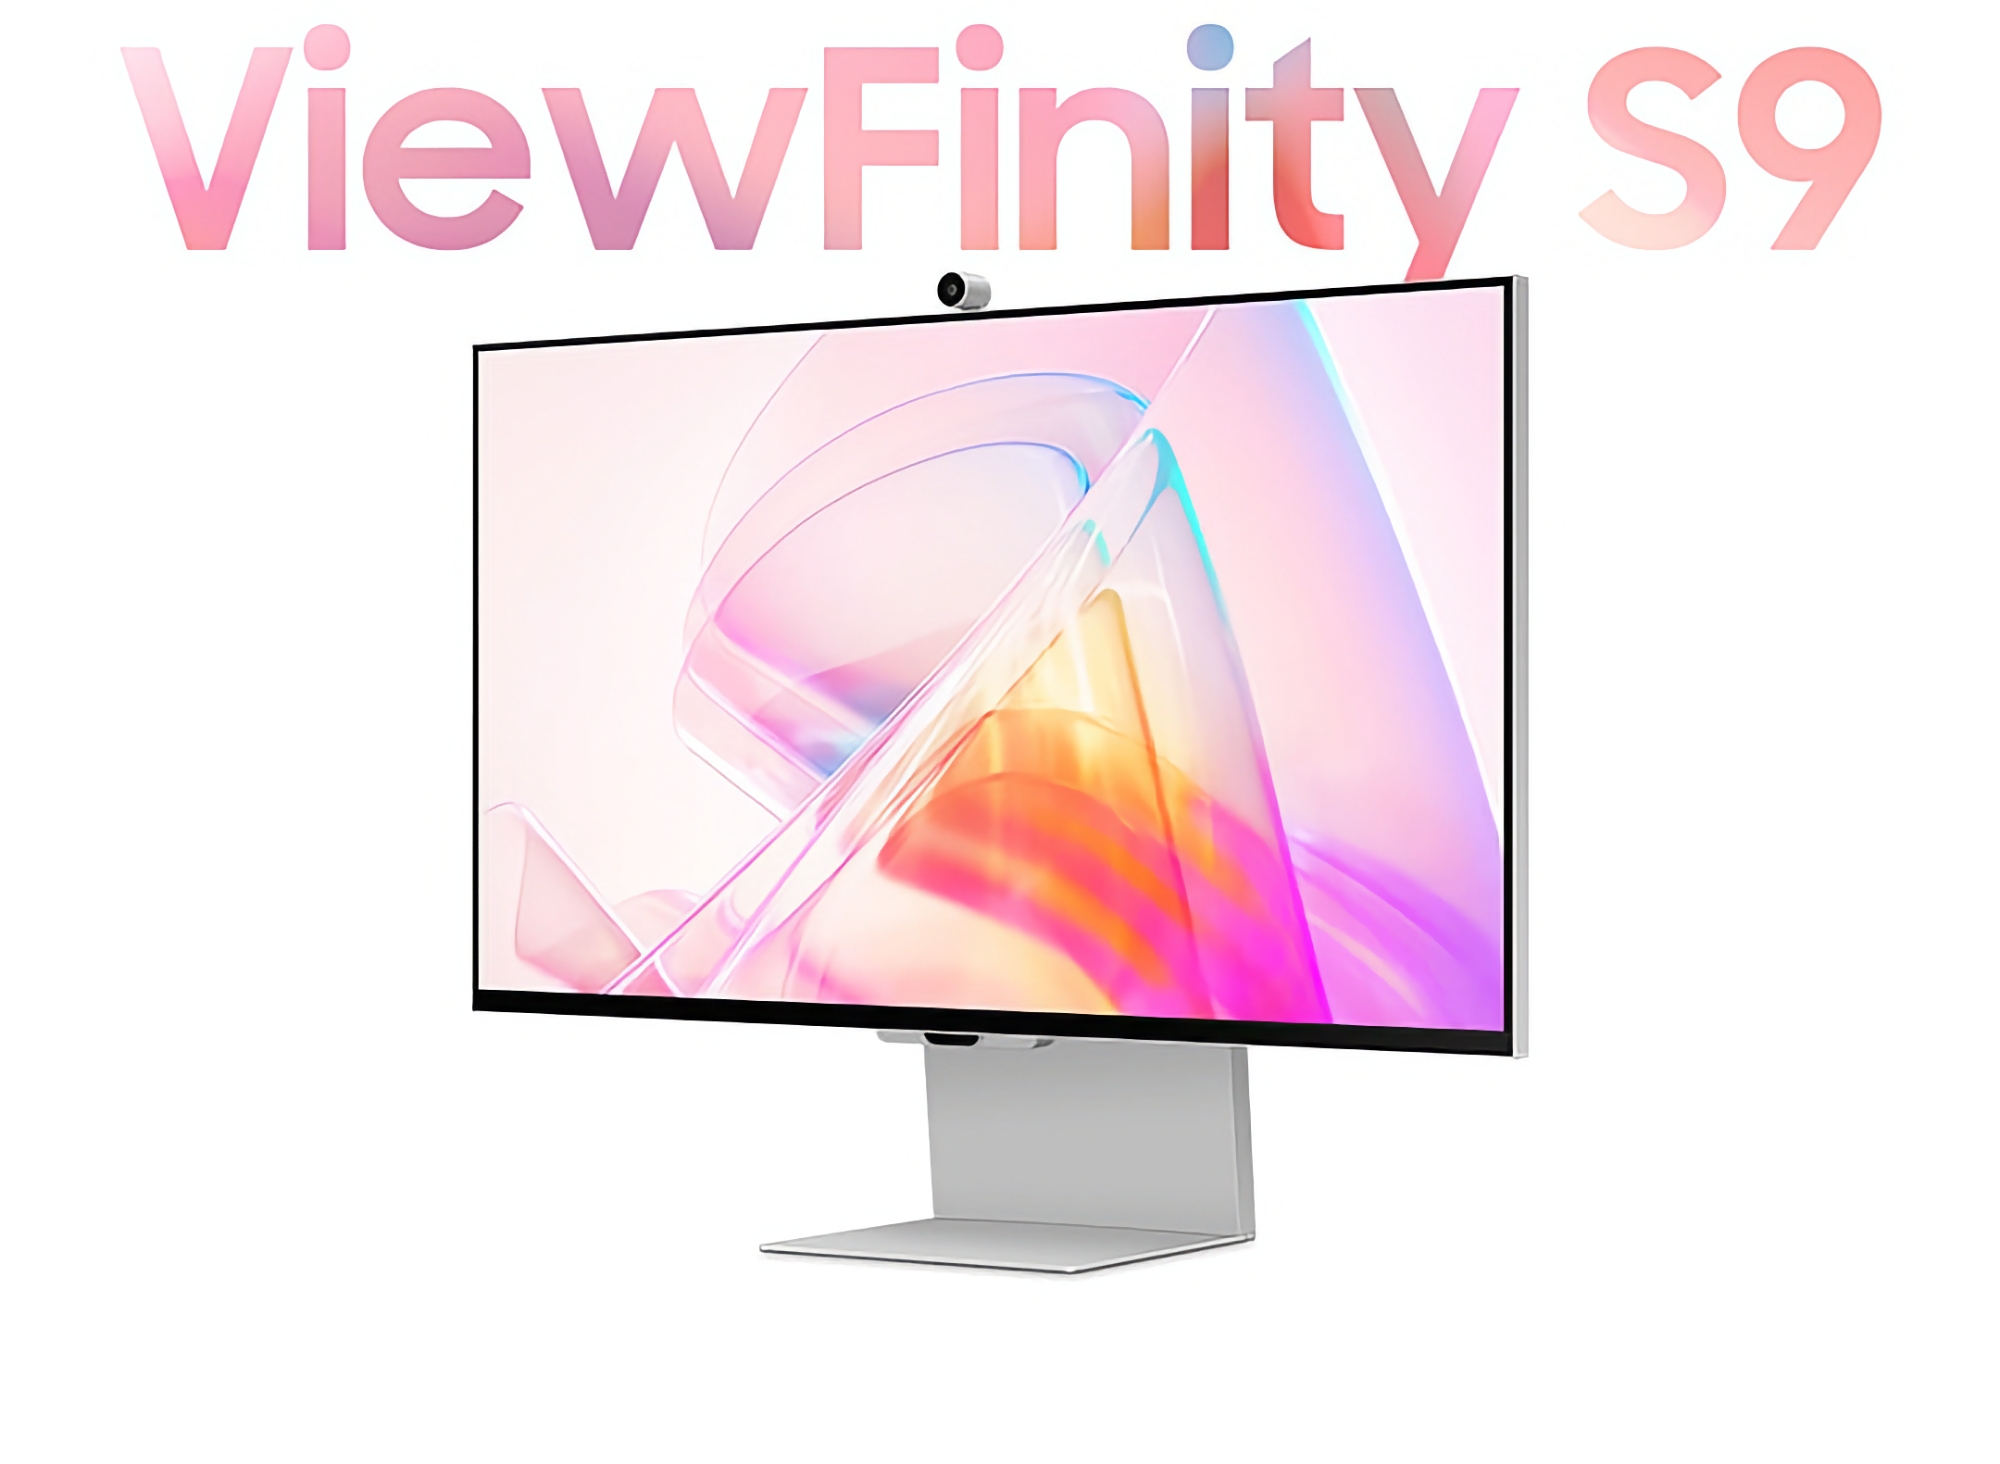 Samsung ViewFinity S9 on Amazon: a 27-inch monitor with a 5K screen and a $600 discount